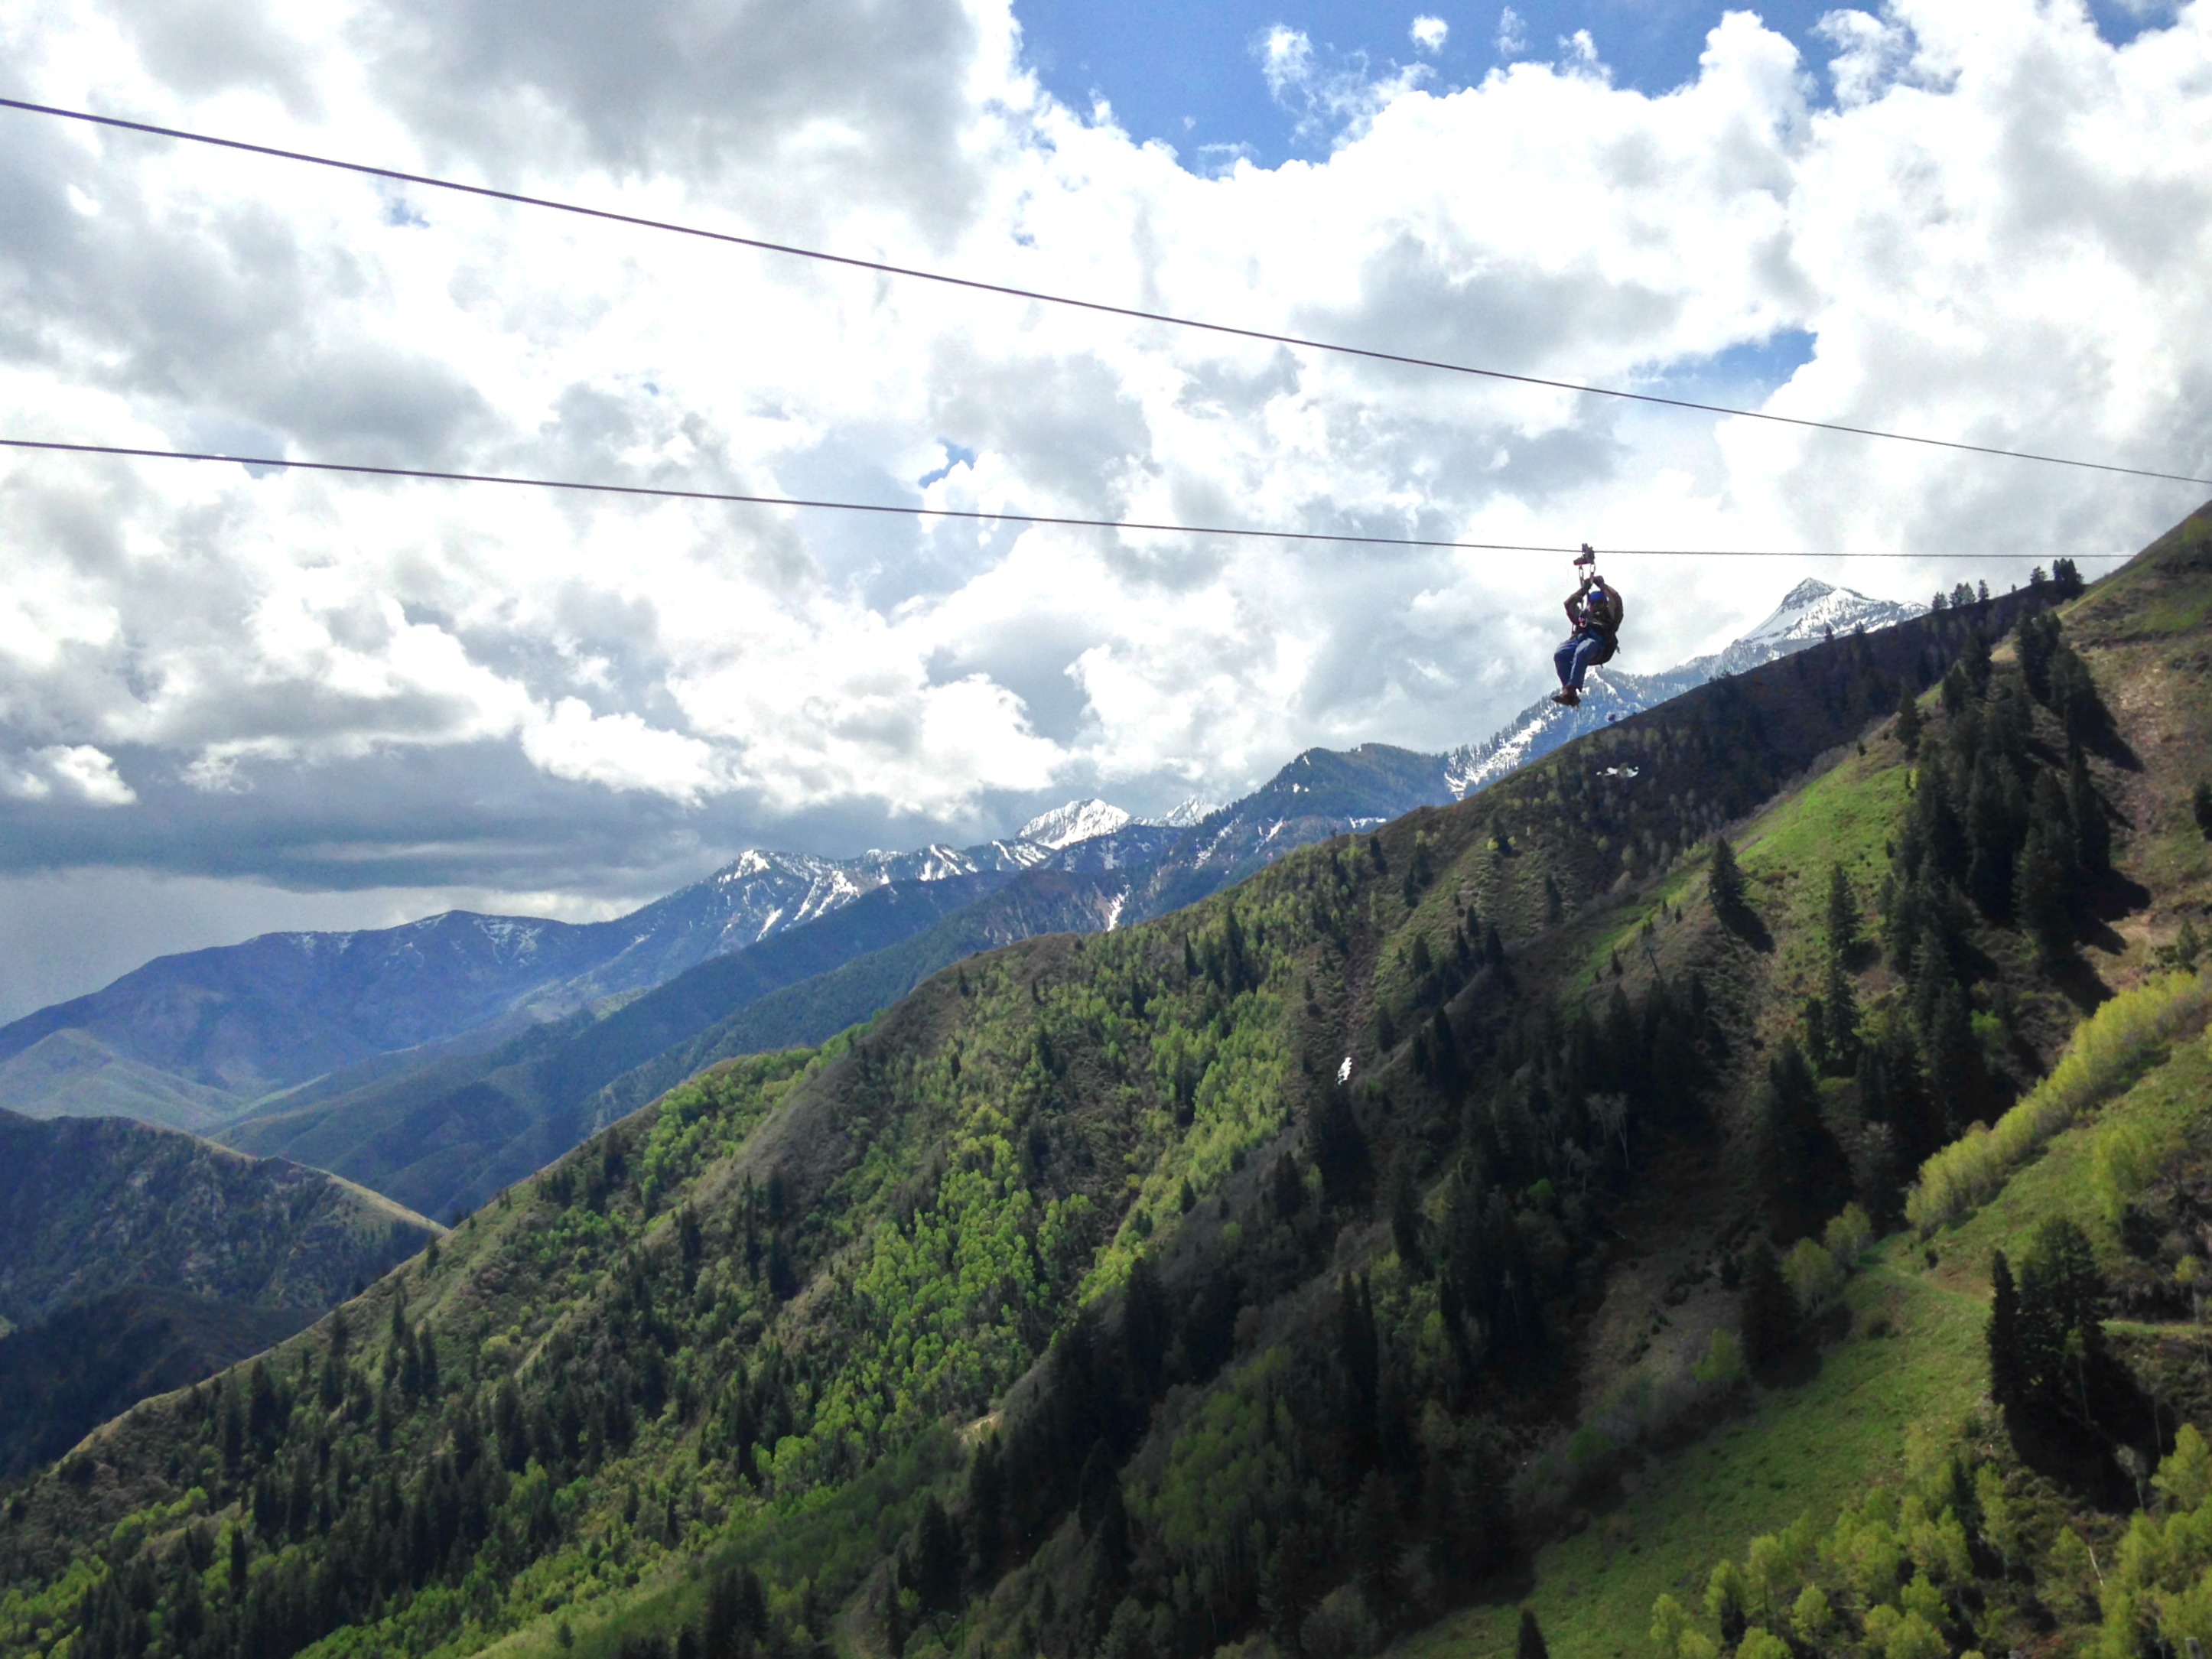 Sundance's Ziptour soars over the breathtaking views of the Rocky Mountains. This one of a kind zip line expects to bring visitors from around the country. (Czar Johnson)